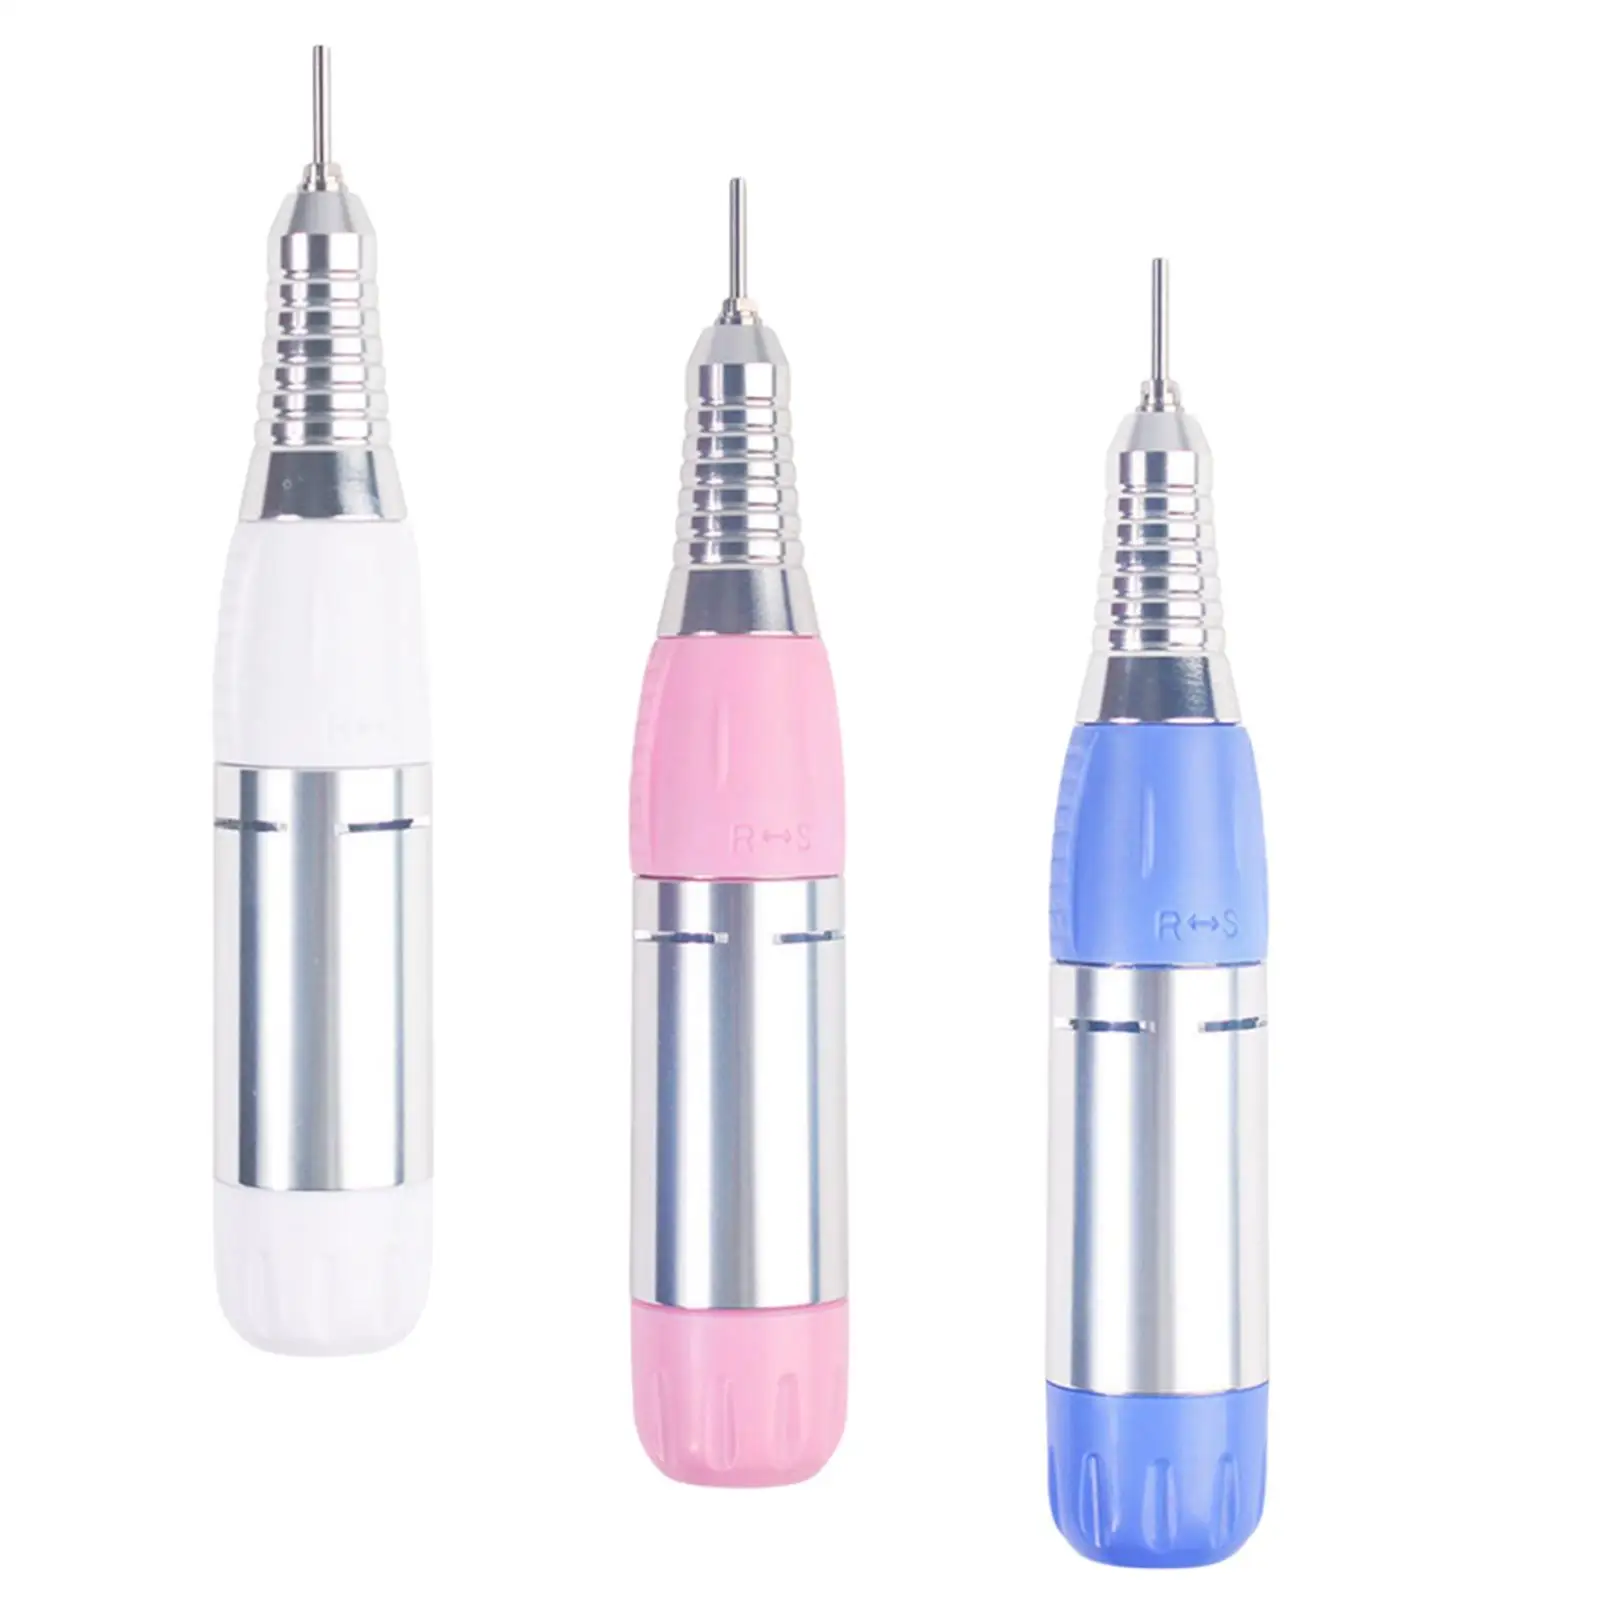 Electric Nail Grinder Handle 25000RPM Polisher Handpiece Nail Art Tool